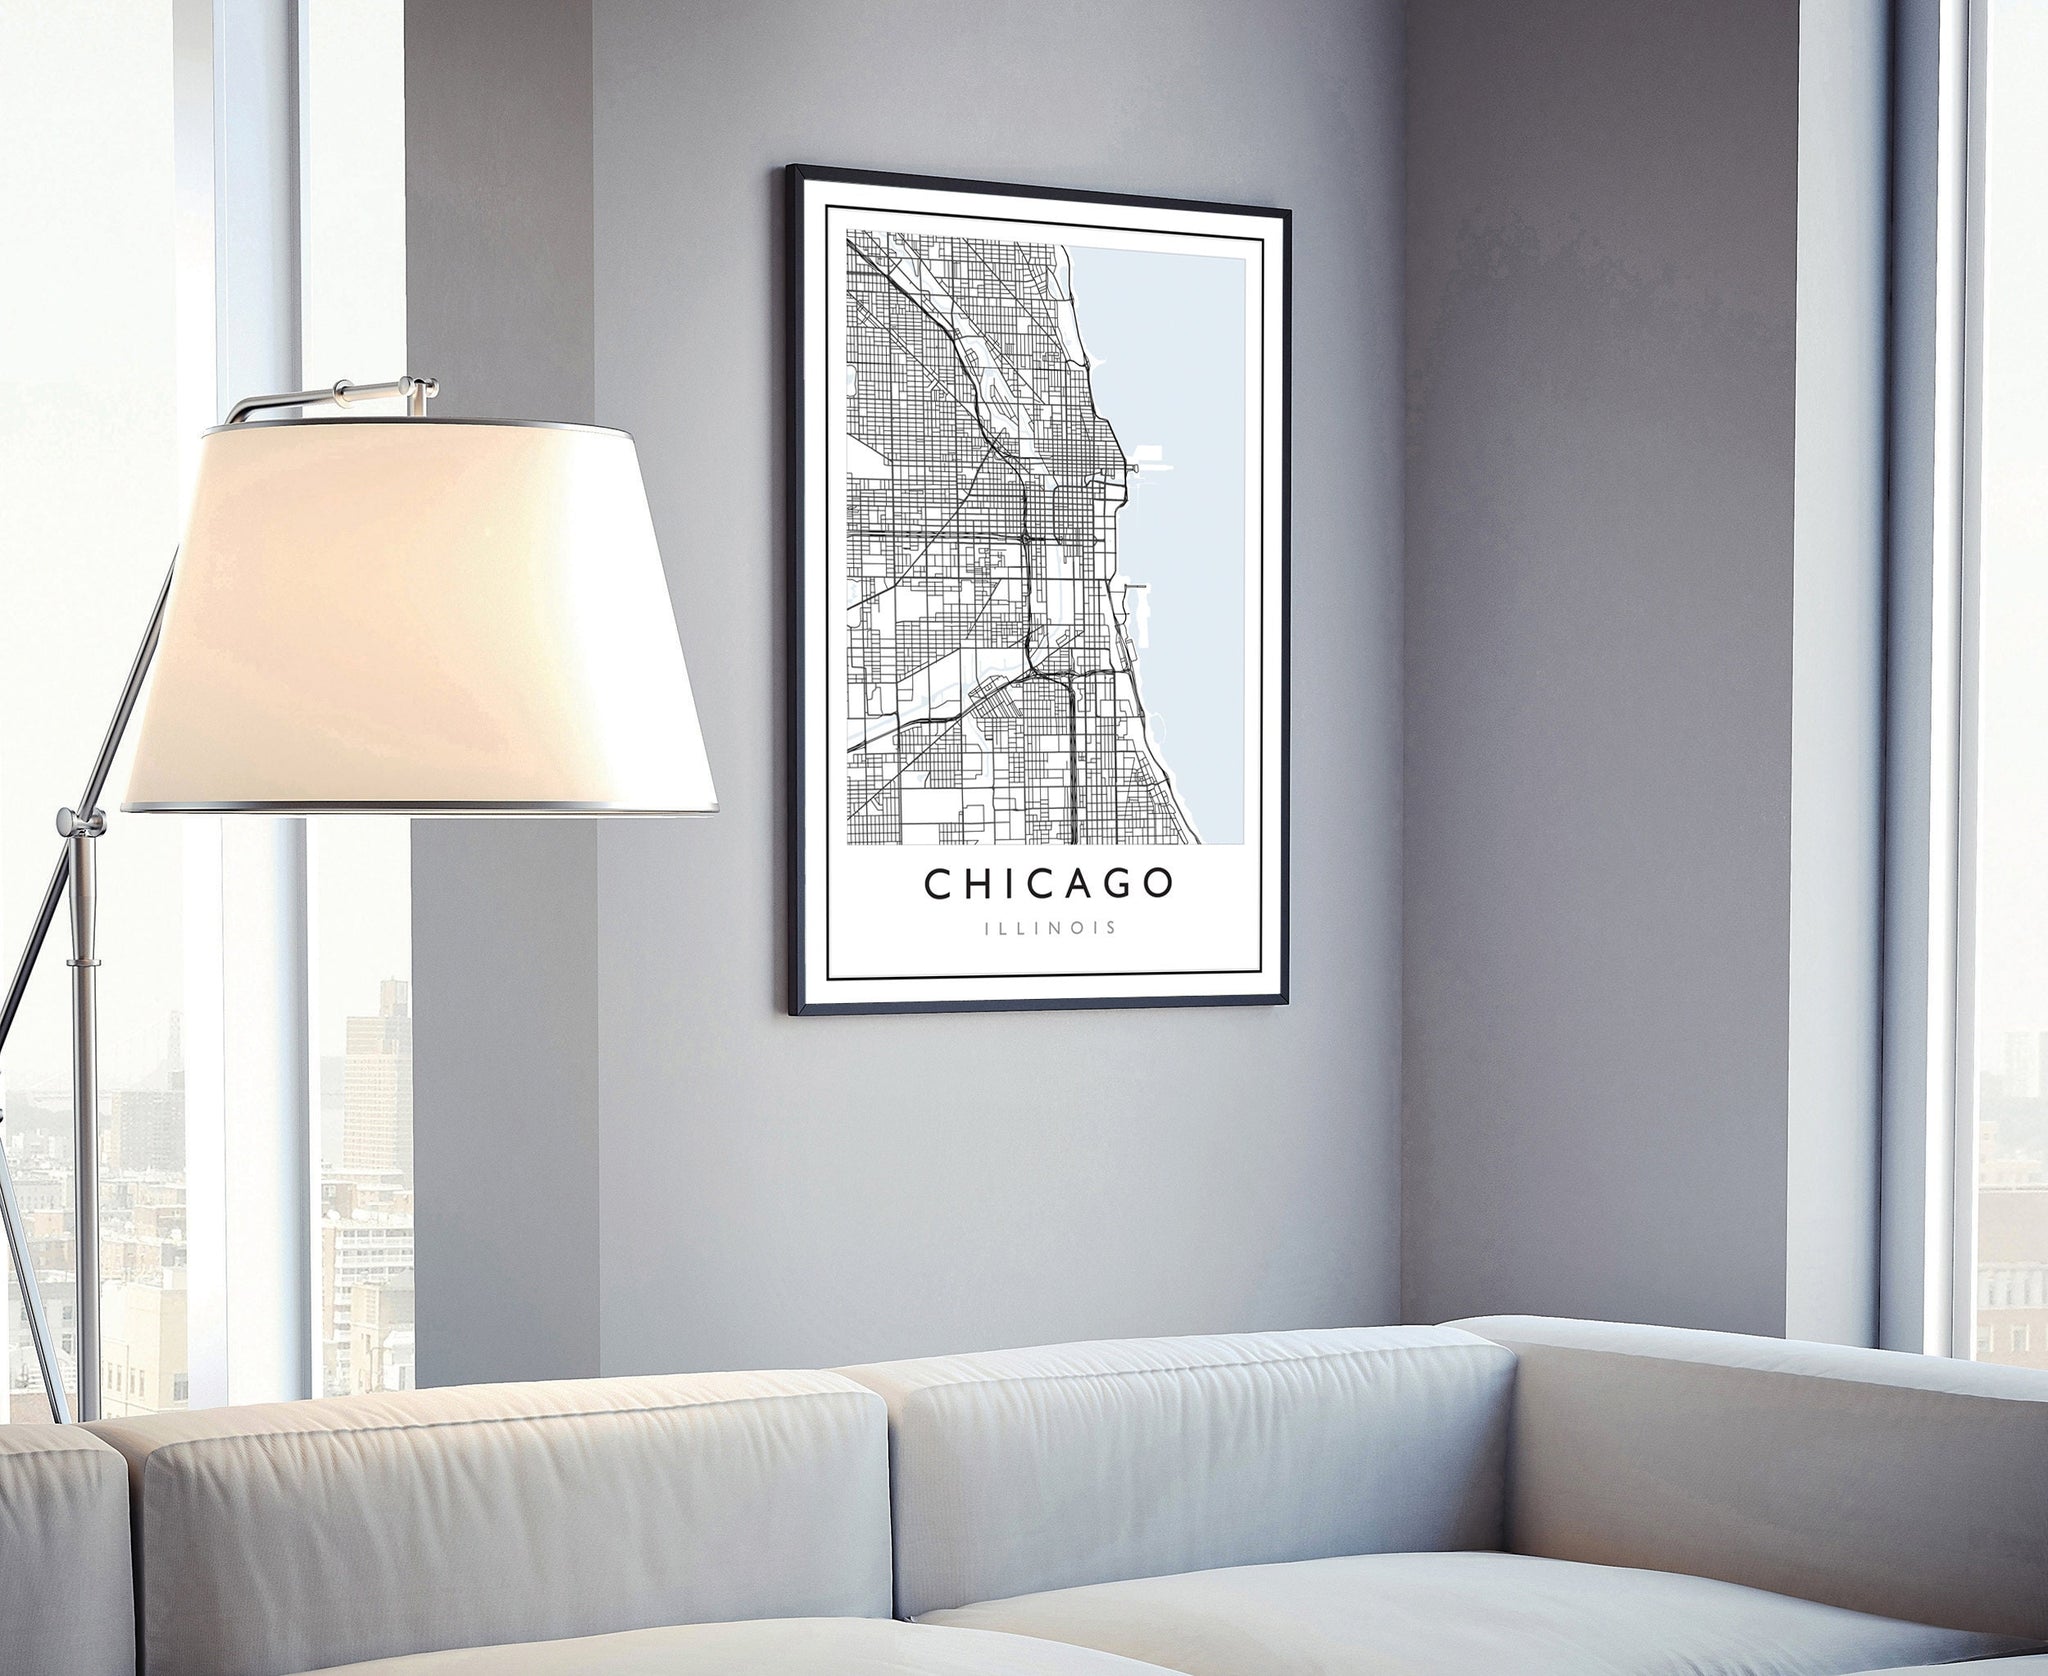 Chicago City Map, Chicago City Road Map Poster, Chicago Illinois City Street Map, Modern US City Map, Home Art Decor, Office Wall Art Print